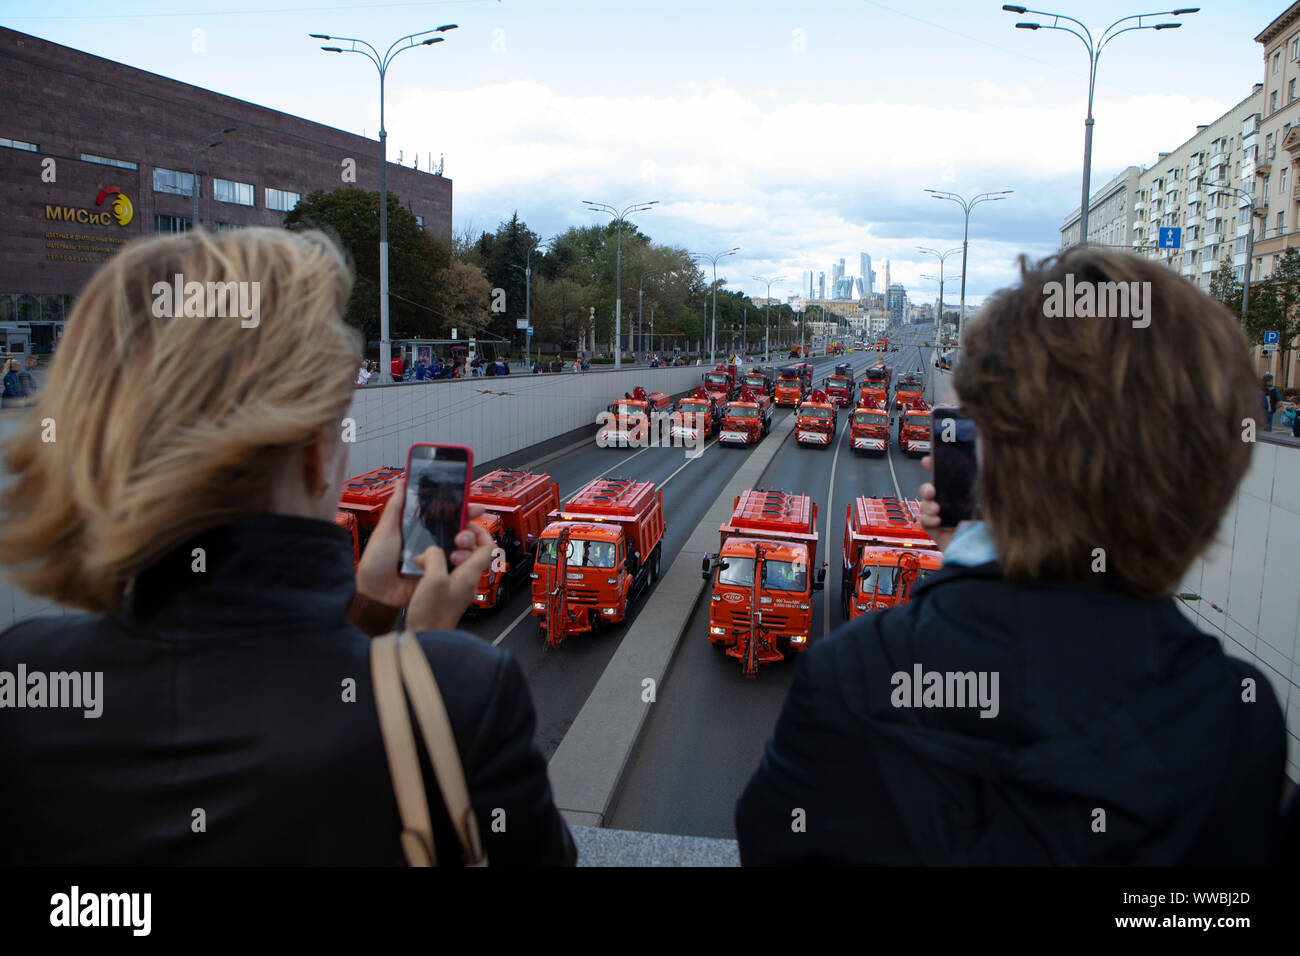 Moscow, Russia. 14th Sep, 2019. People take pictures of a parade of municipal service vehicles in central Moscow, Russia, on Sept. 14, 2019. About 700 vehicles took part in the Municipal Service Vehicle Parade on Saturday. Credit: Alexander Zemlianichenko Jr/Xinhua Stock Photo